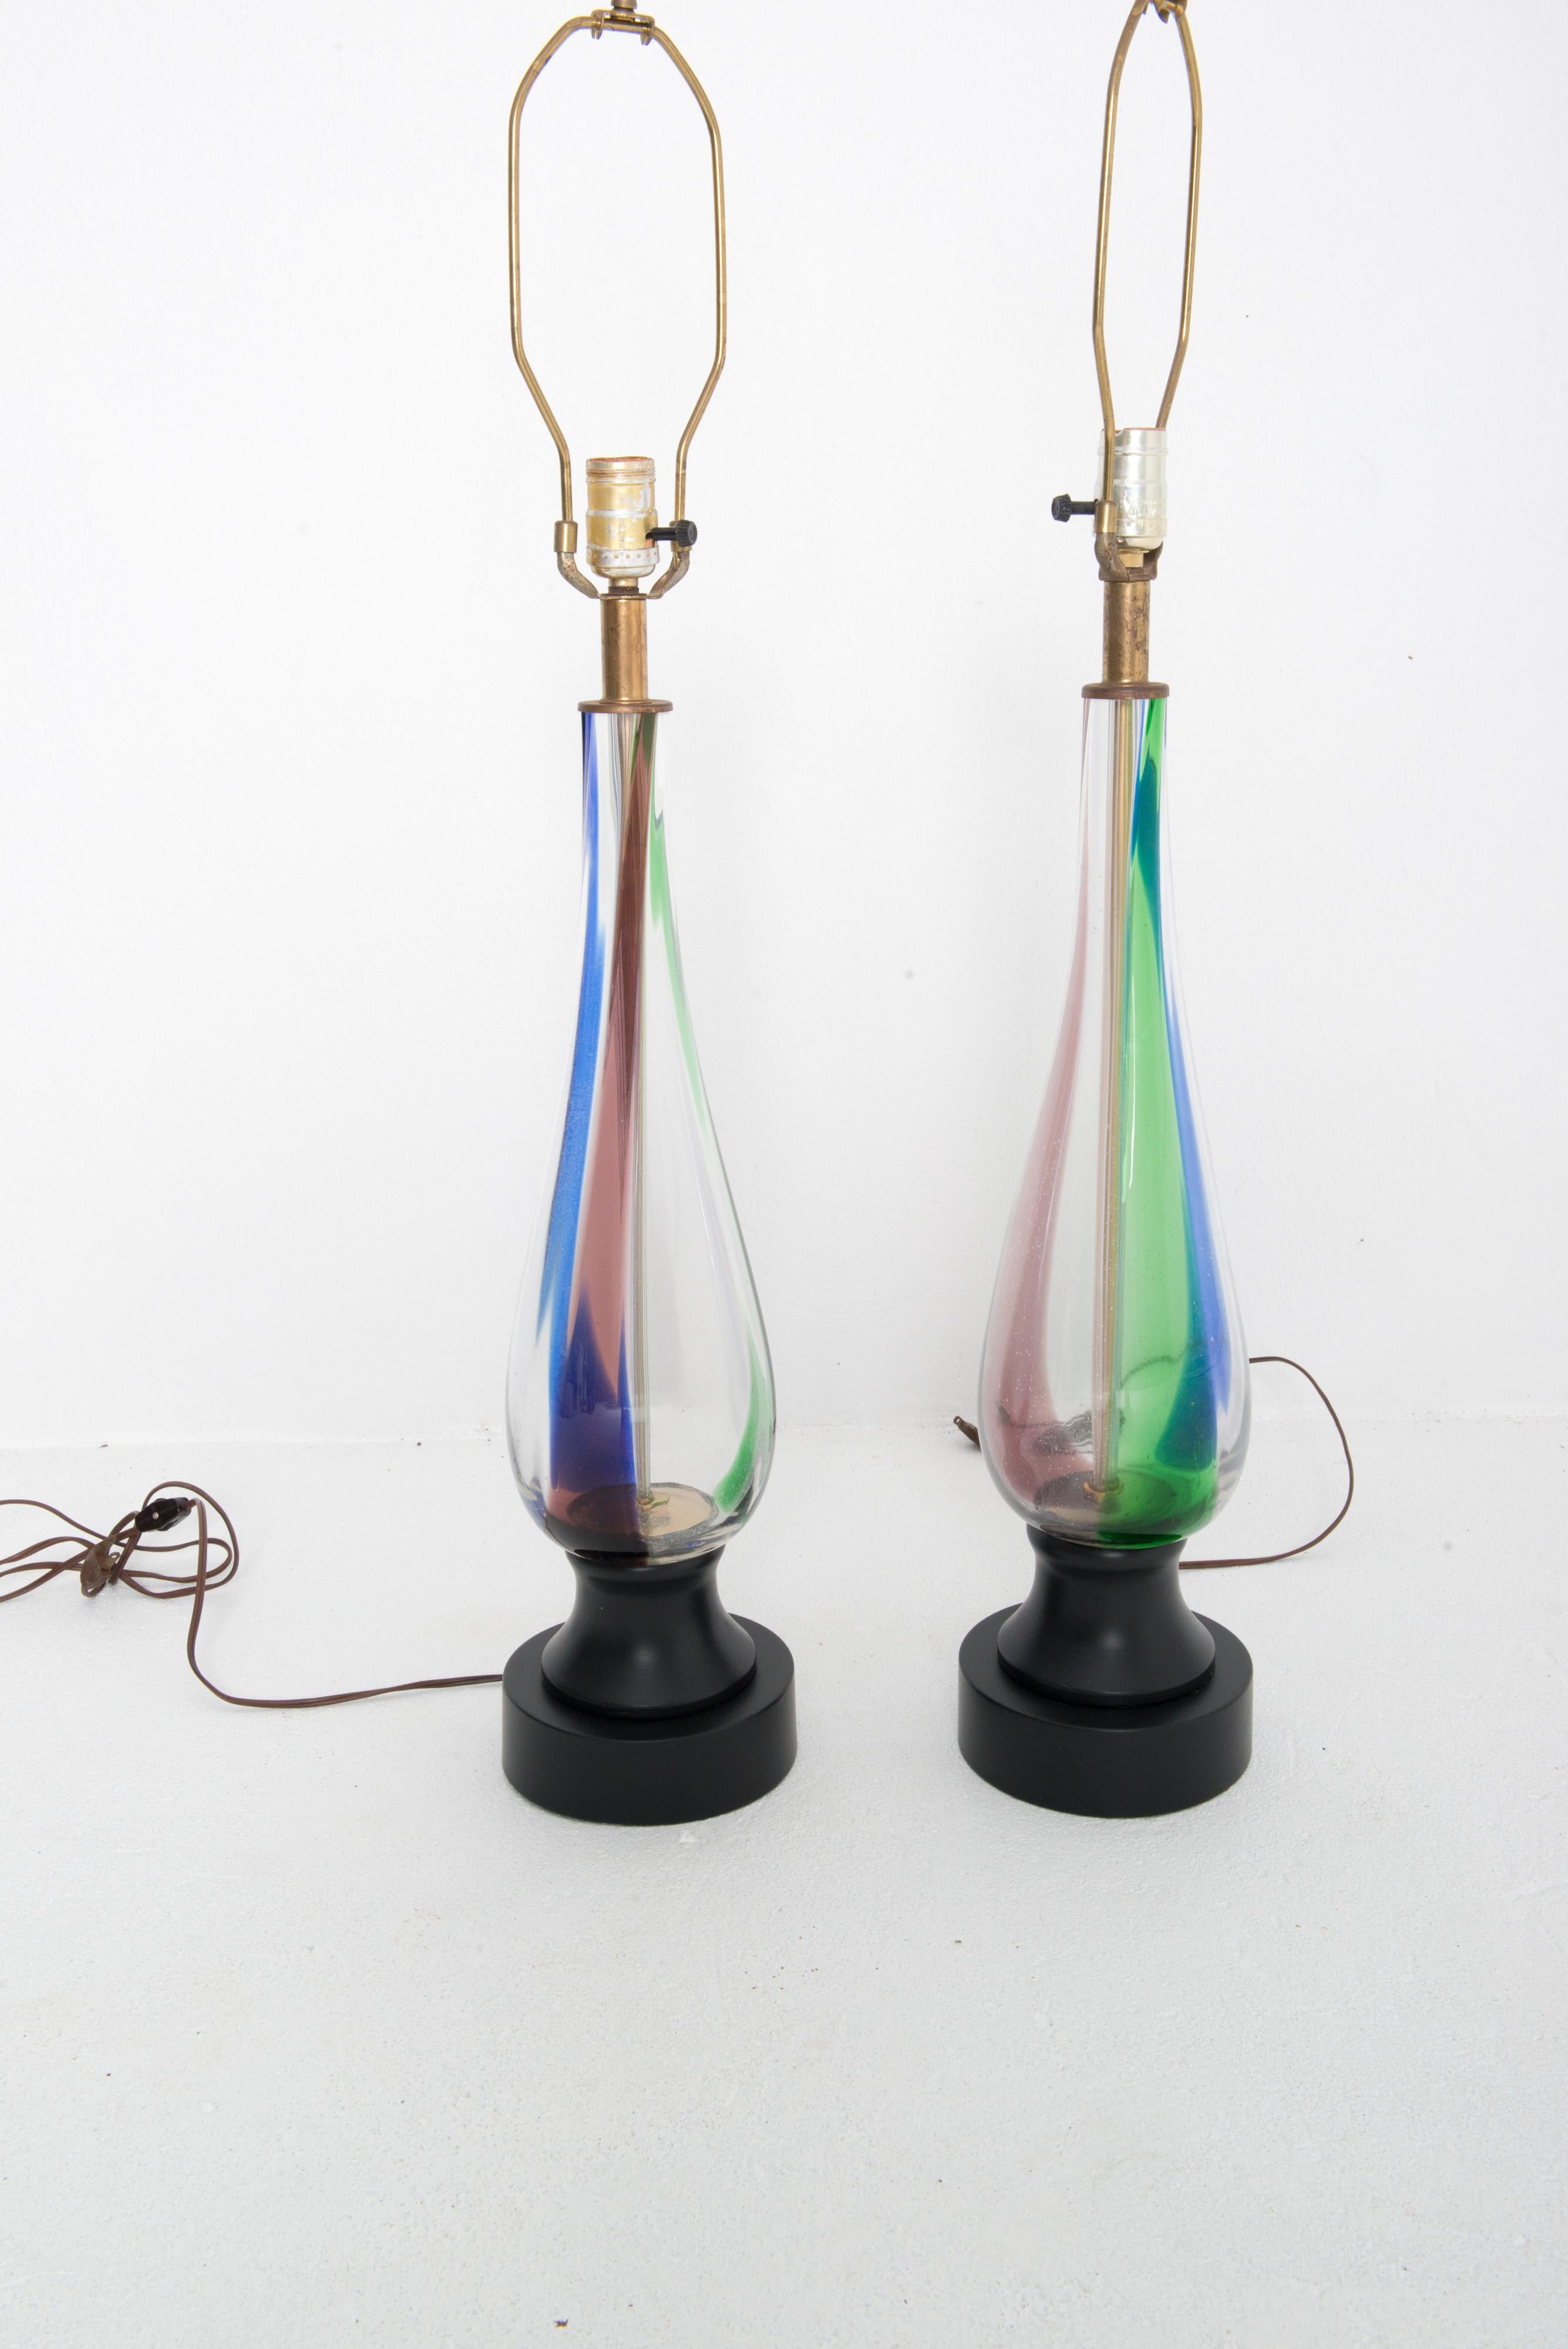 Pair of Mid-Century Modern blown glass table lamps with multi color vertical streaks within the glass. Harps and finials are included. Round black painted metal bases. No shades.